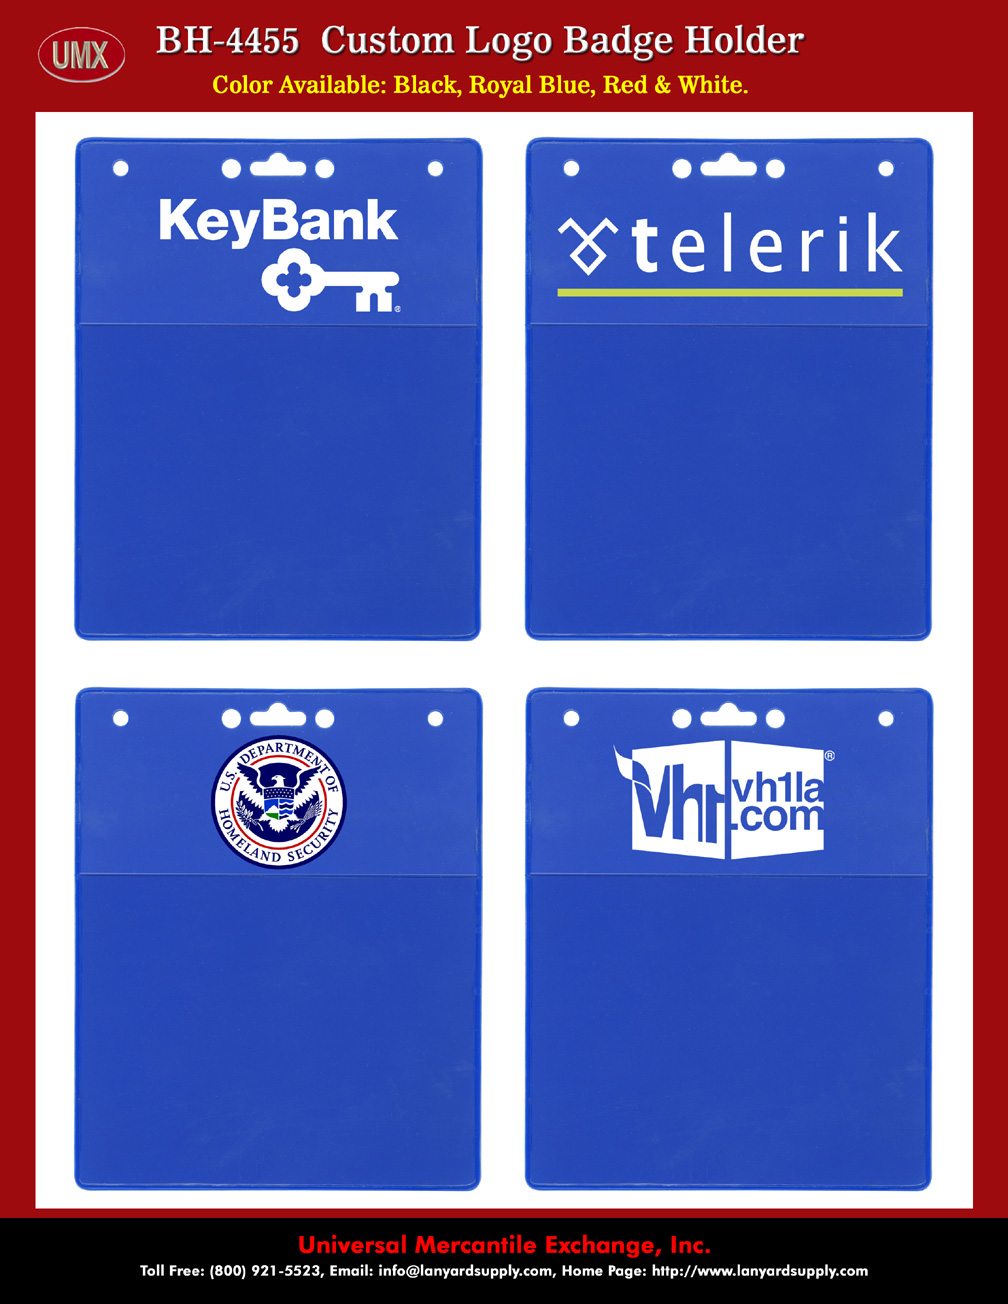 Custom Imprinted Company Name Badge Holders With Royal Blue Color Background